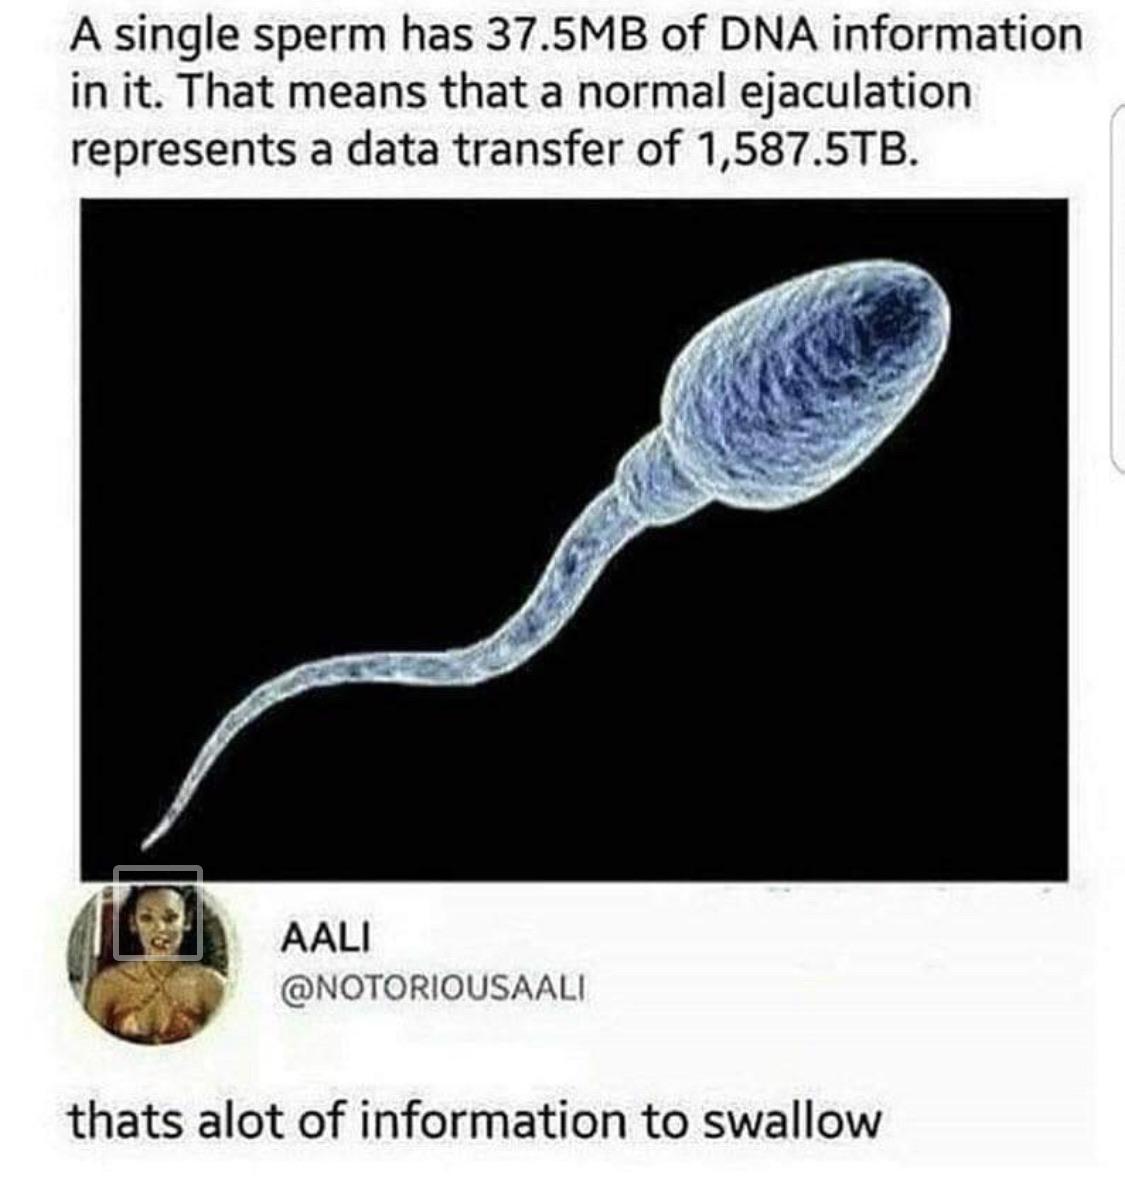 single sperm has 37.5 mb of dna information in it - A single sperm has 37.5MB of Dna information in it. That means that a normal ejaculation represents a data transfer of 1,587.5TB. Aali thats alot of information to swallow